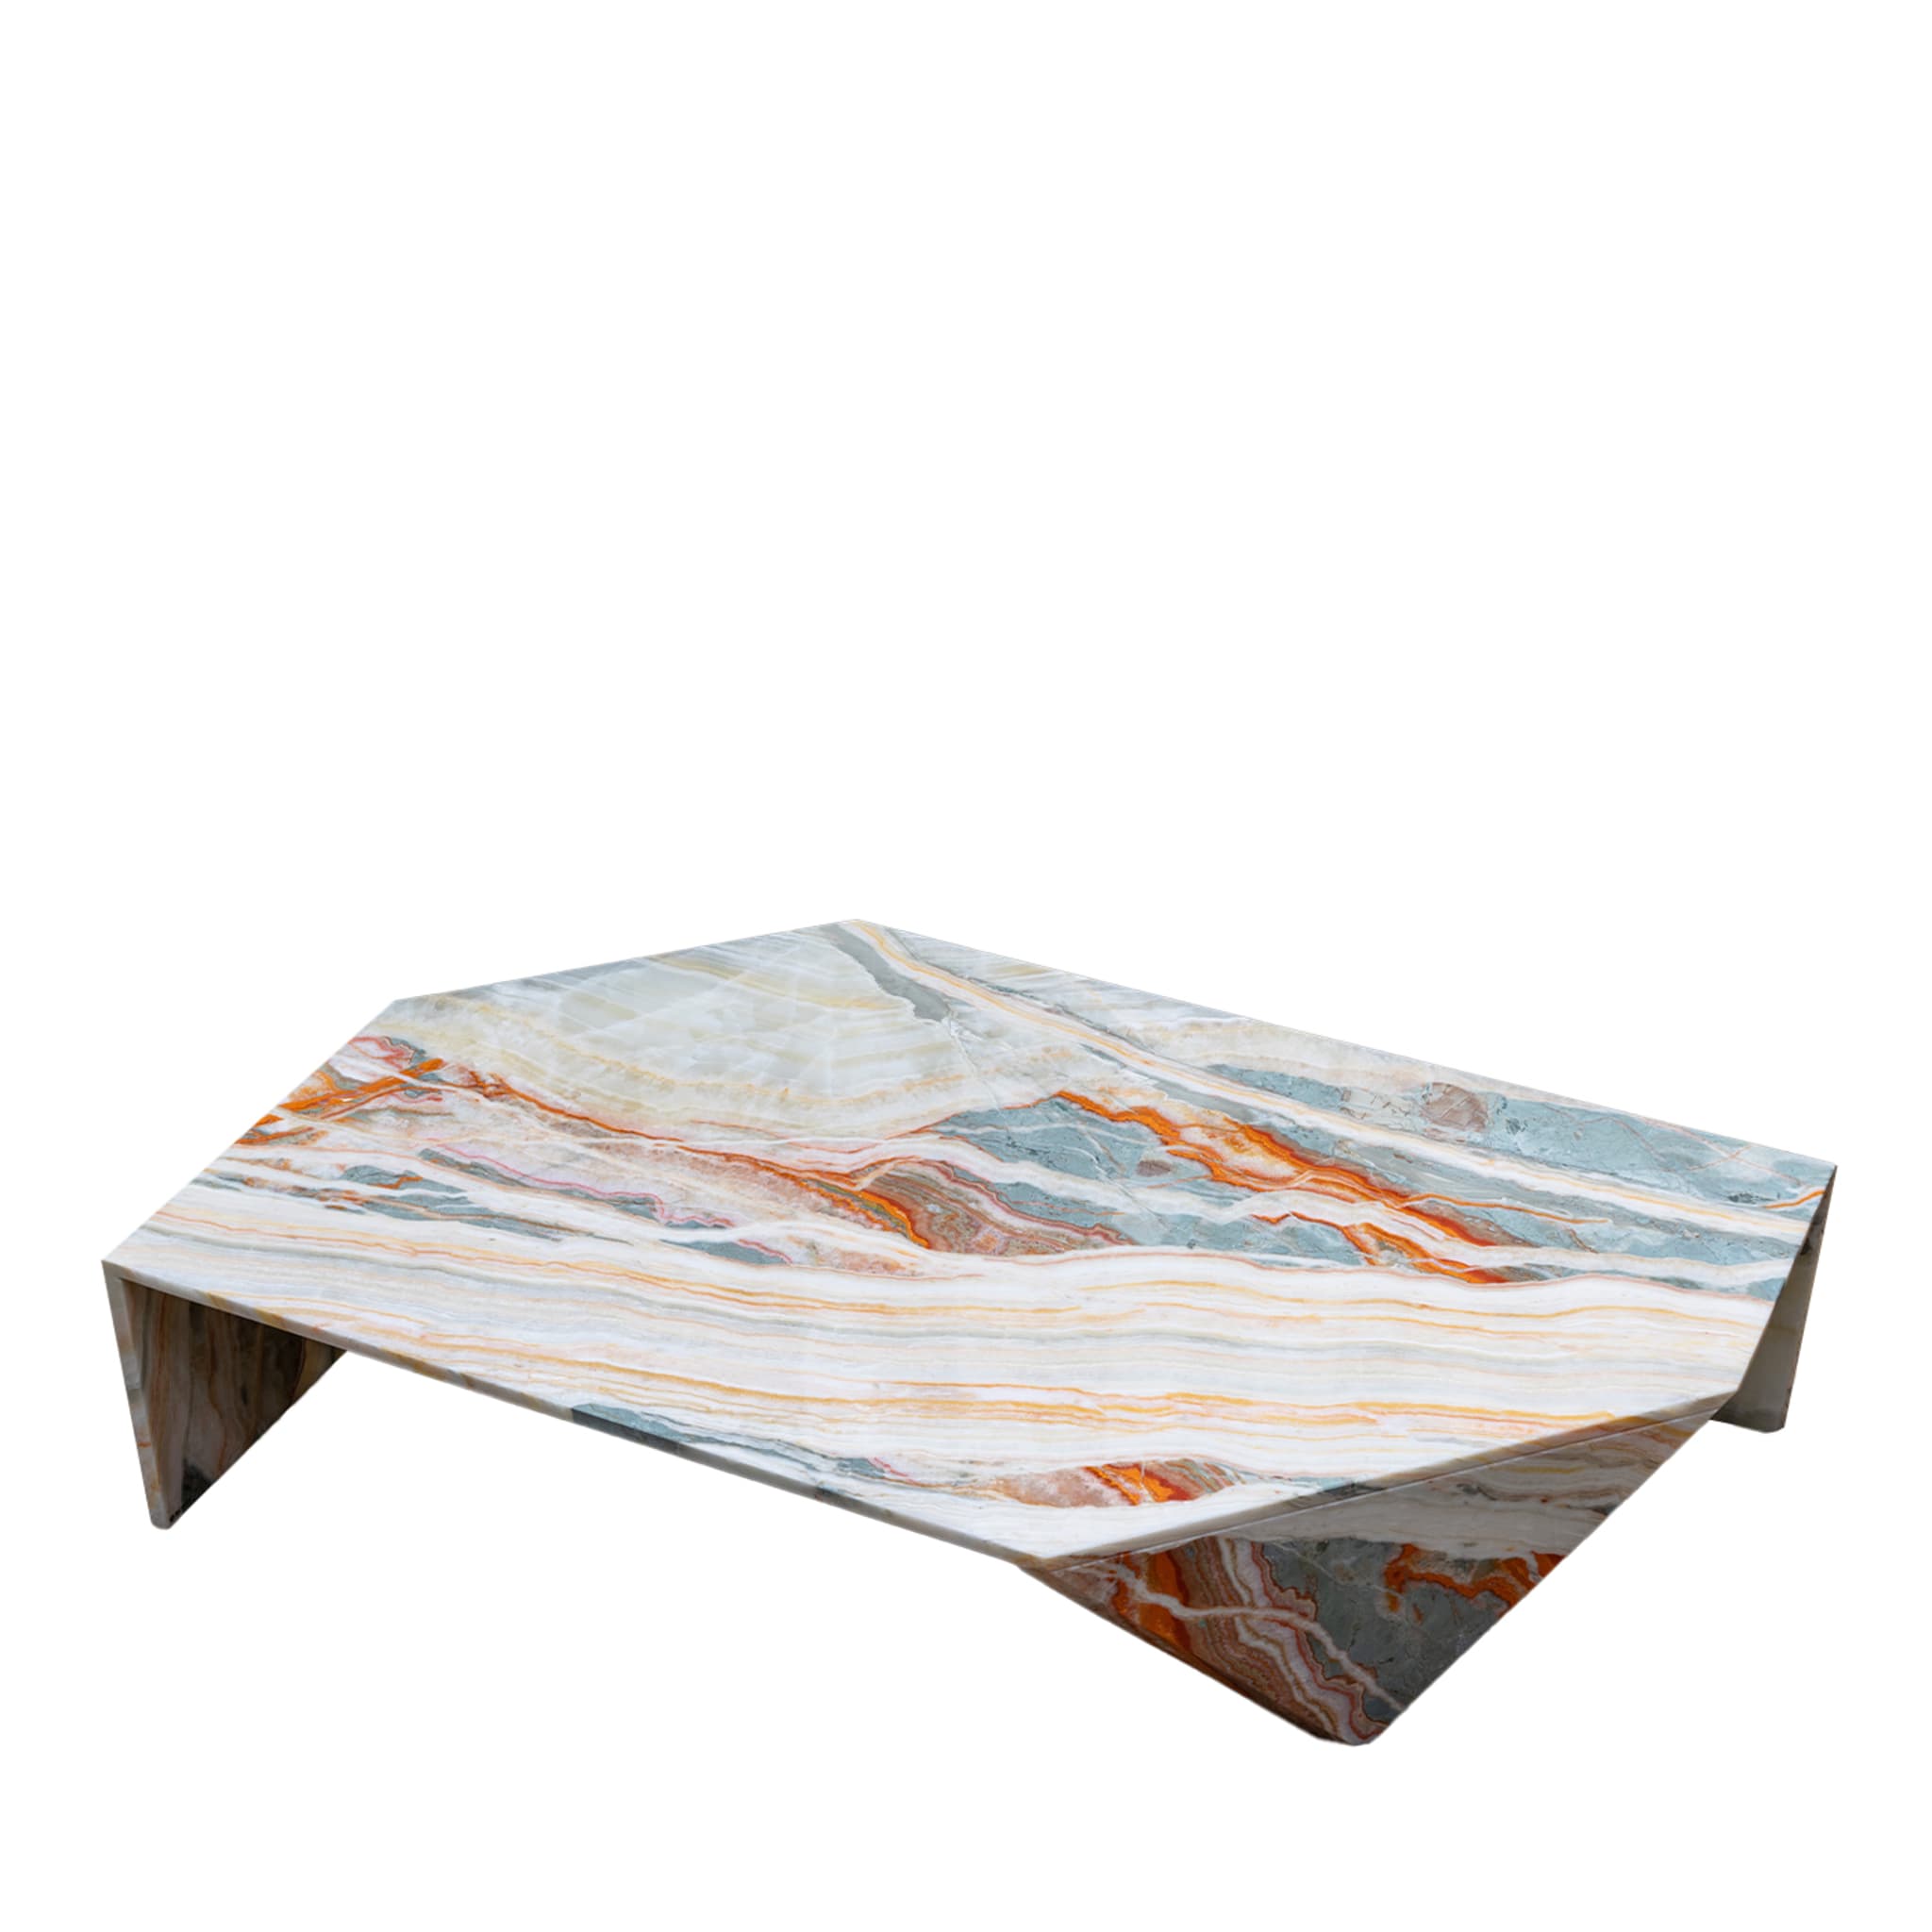 Origami Rainbow Coffee Table by Patricia Urquiola - Size L - Main view